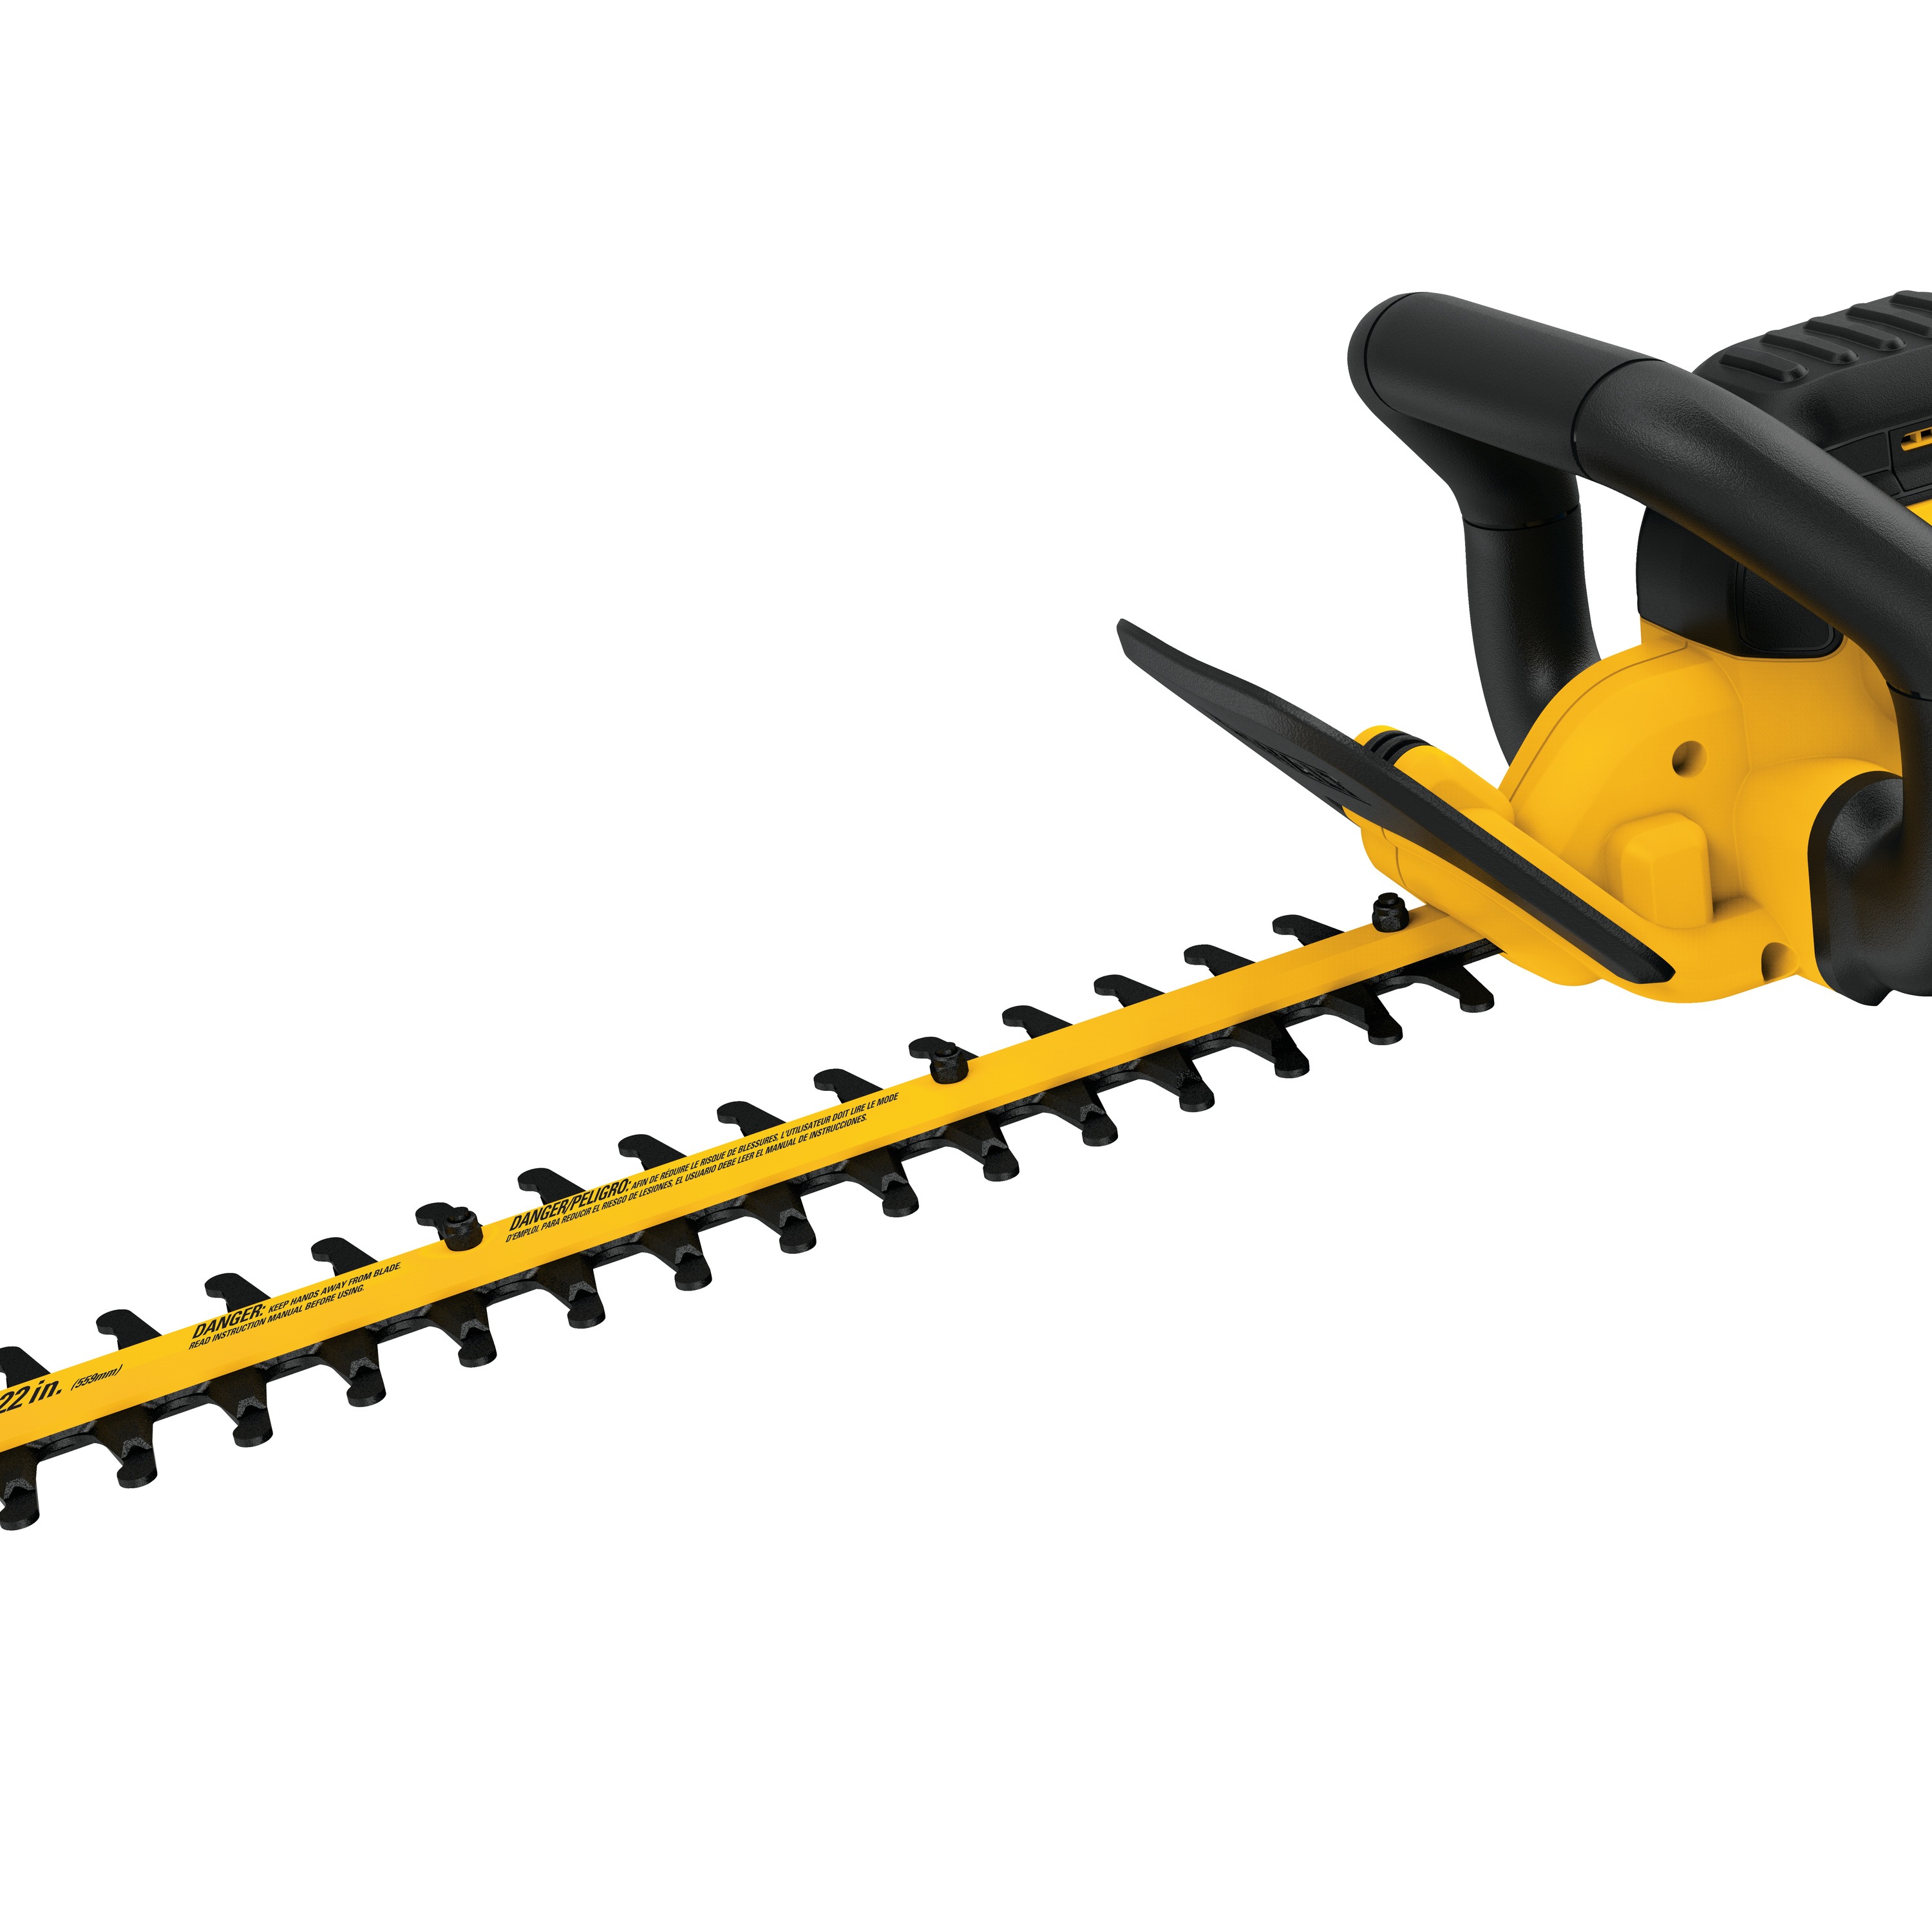 gas powered hedge trimmers at lowe's